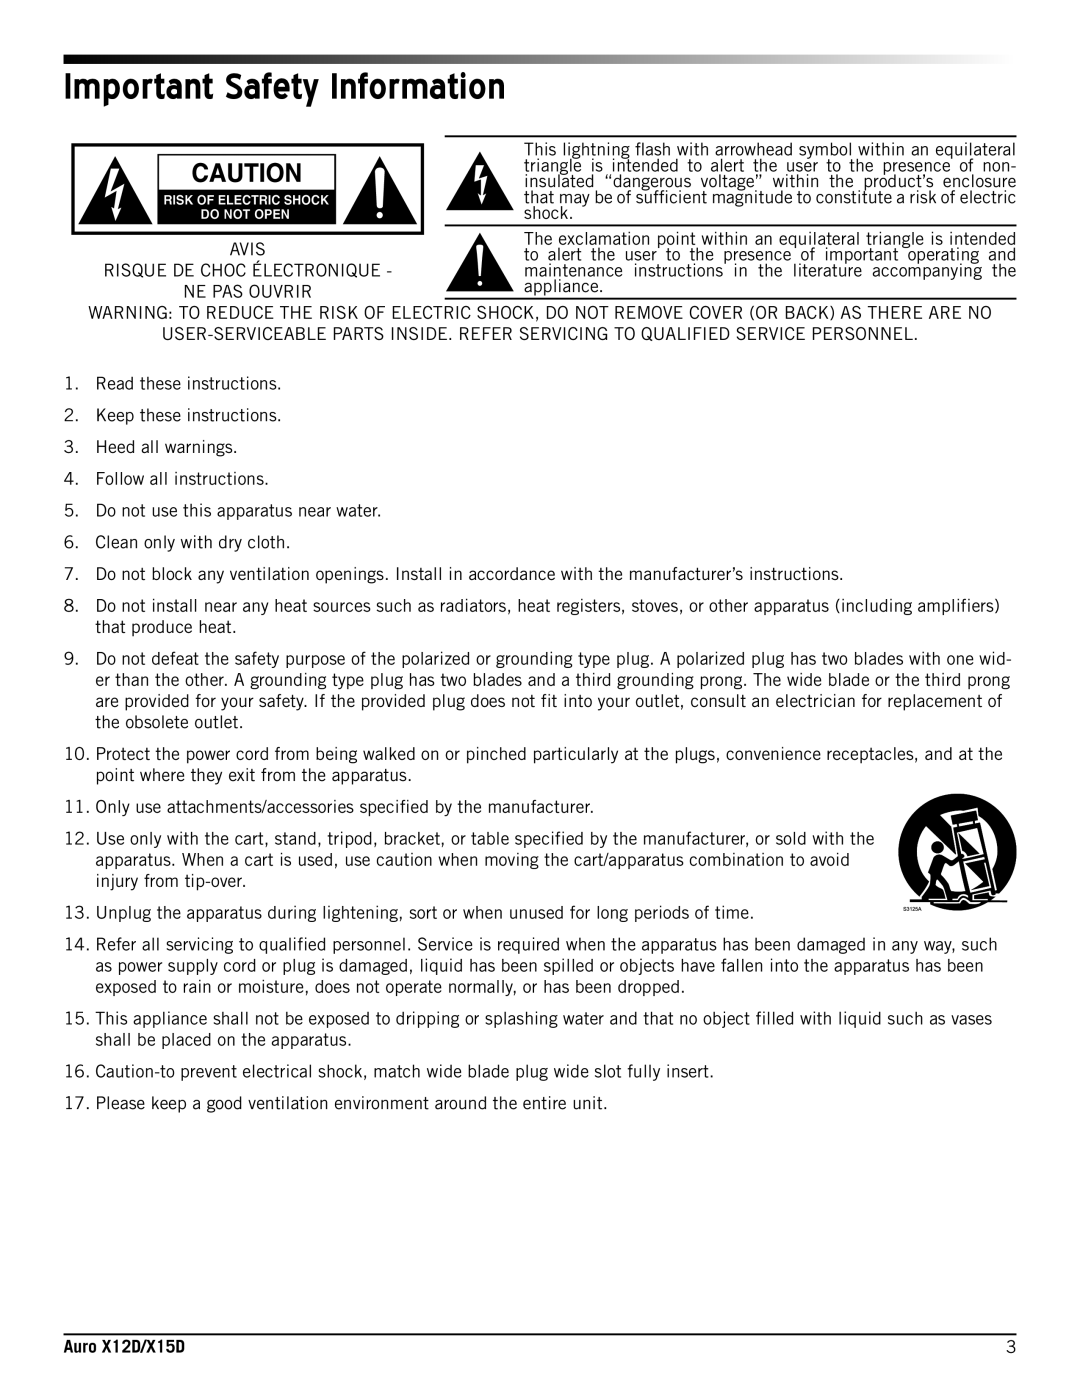 Samson owner manual Important Safety Information, Auro X12D/X15D 